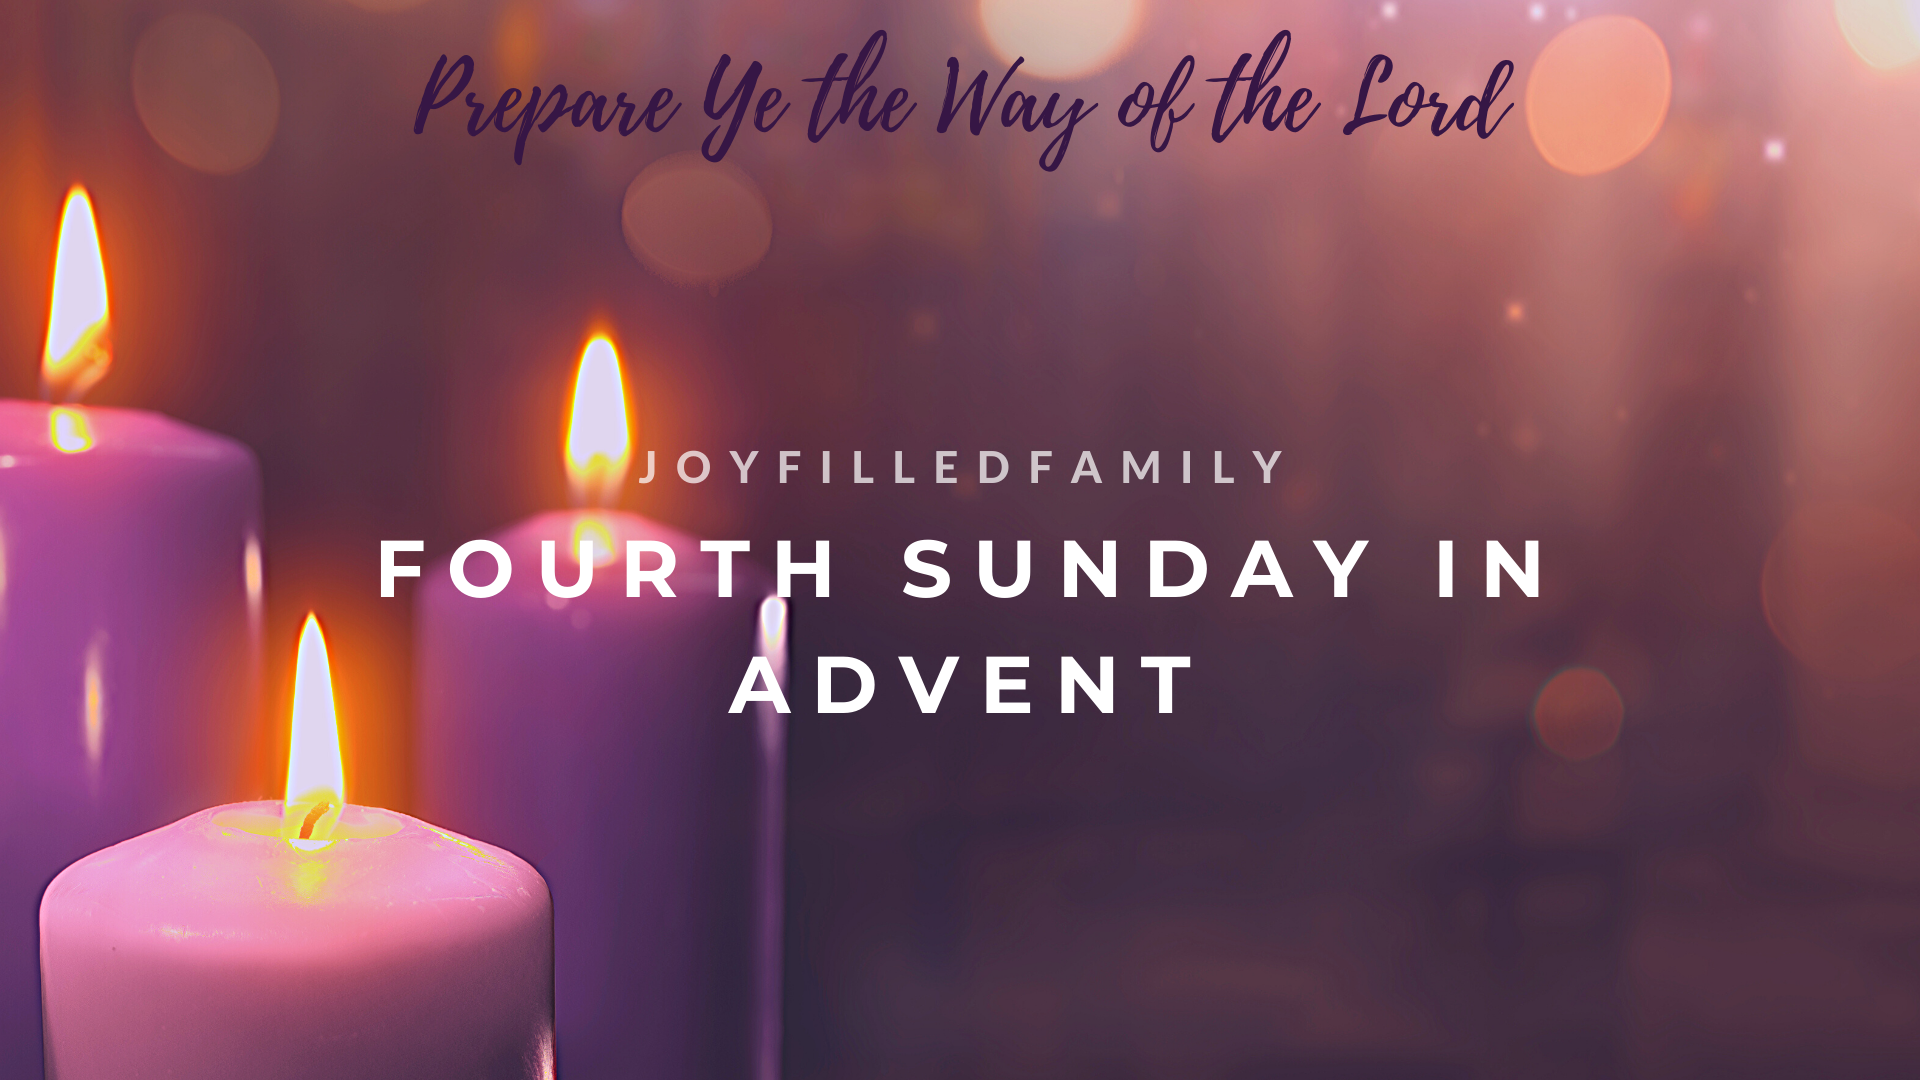 The Fourth Sunday In Advent